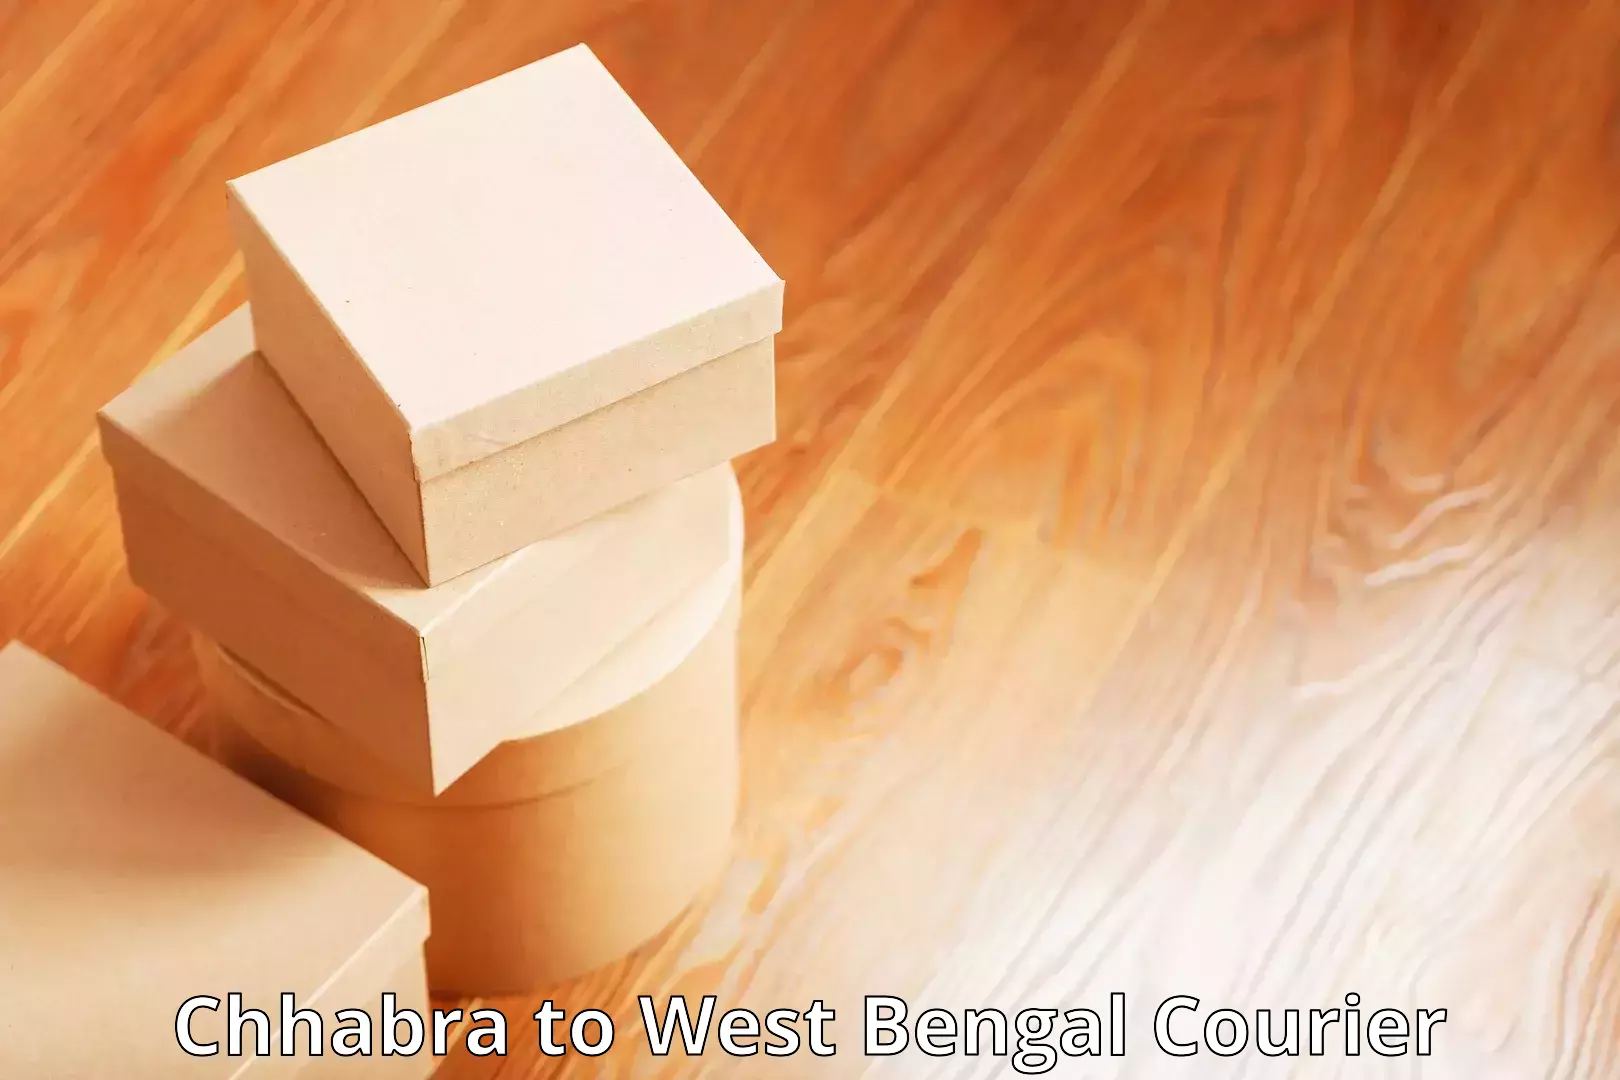 Flexible delivery scheduling Chhabra to West Bengal